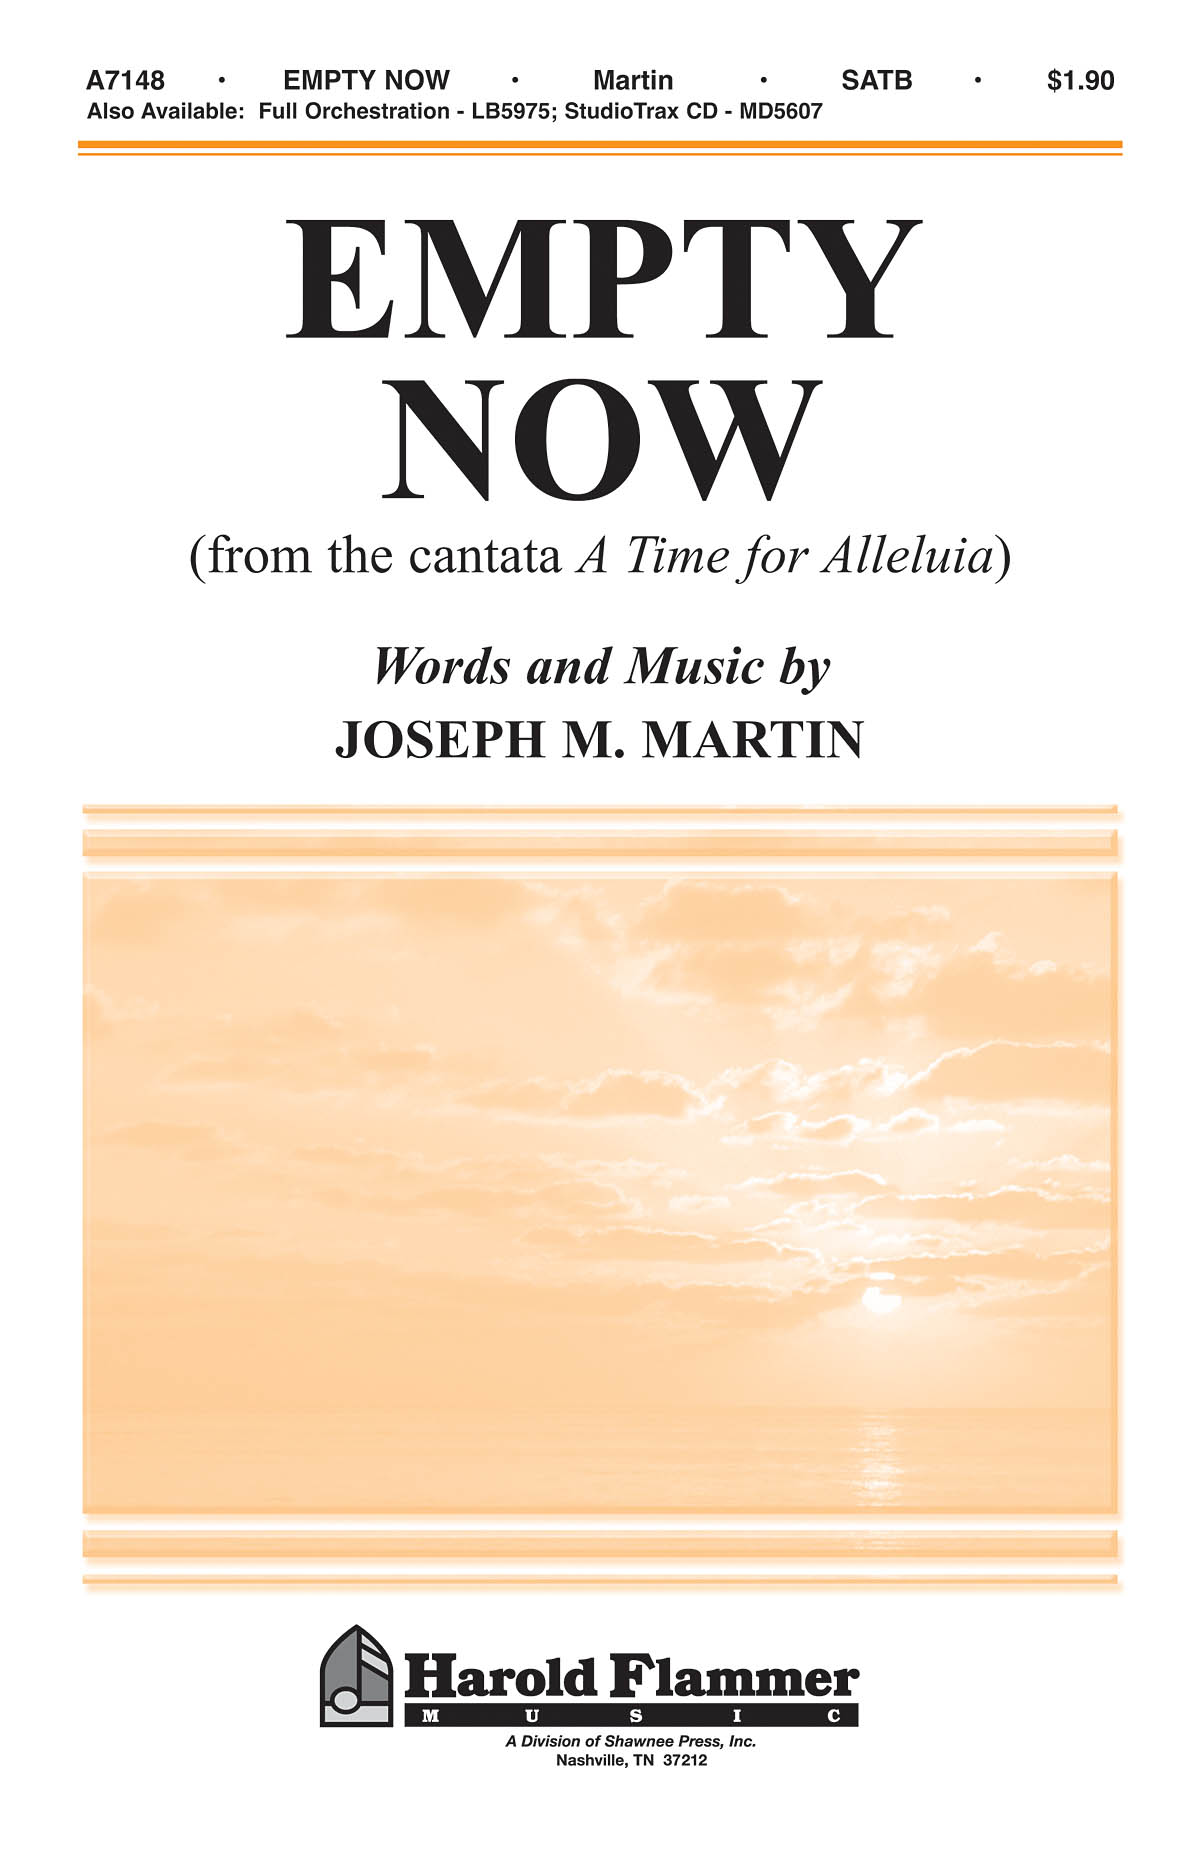 Joseph M. Martin: Empty Now from A Time for Alleluia: SATB: Vocal Score